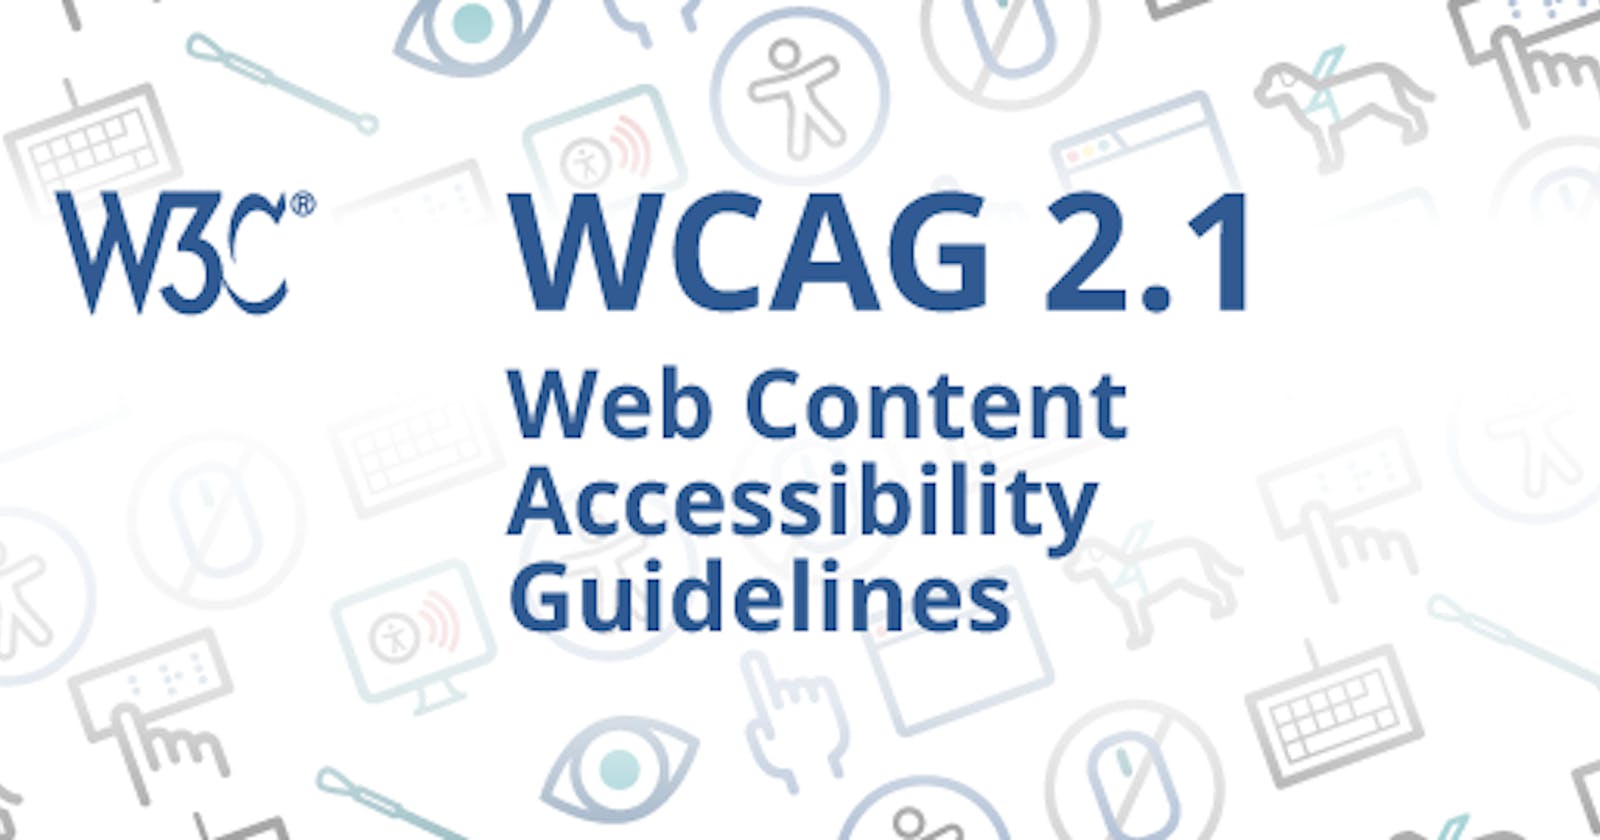 InclusiveDocs is WCAG 2.1 AA Compliant! What Does This Mean?